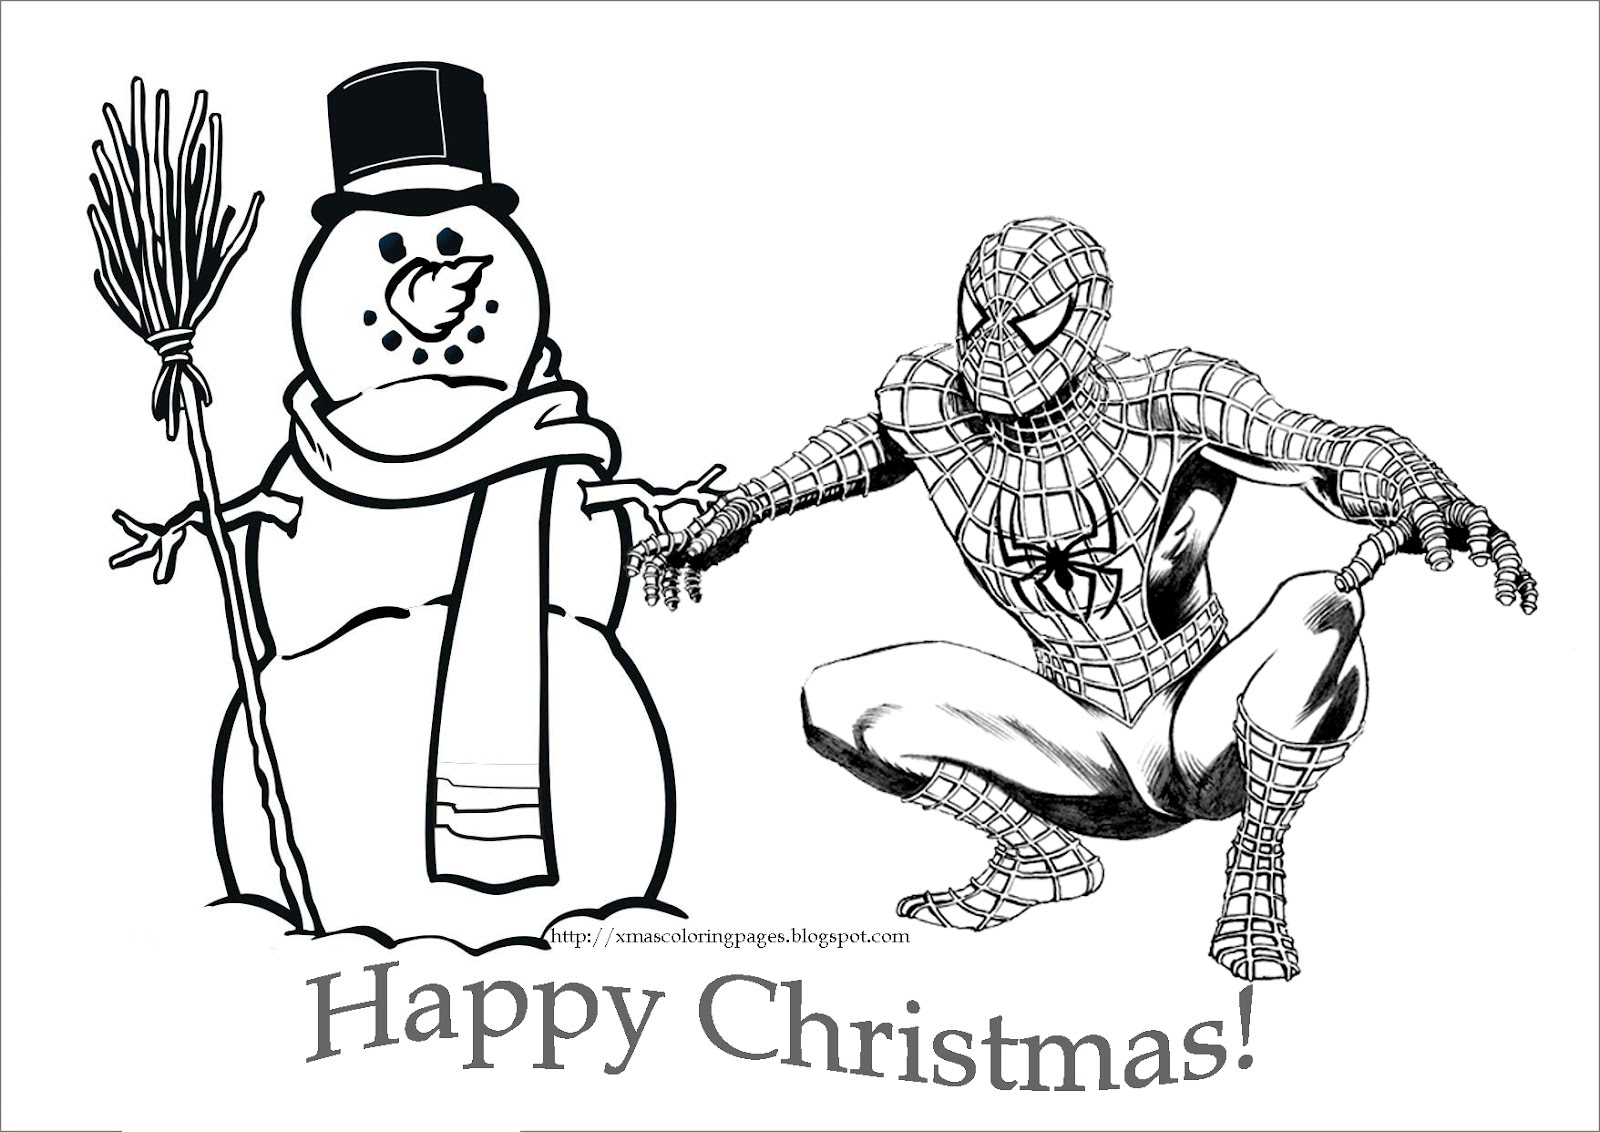 SPIDERMAN COLORING: SPIDERMAN CHRISTMAS COLORING PAGE